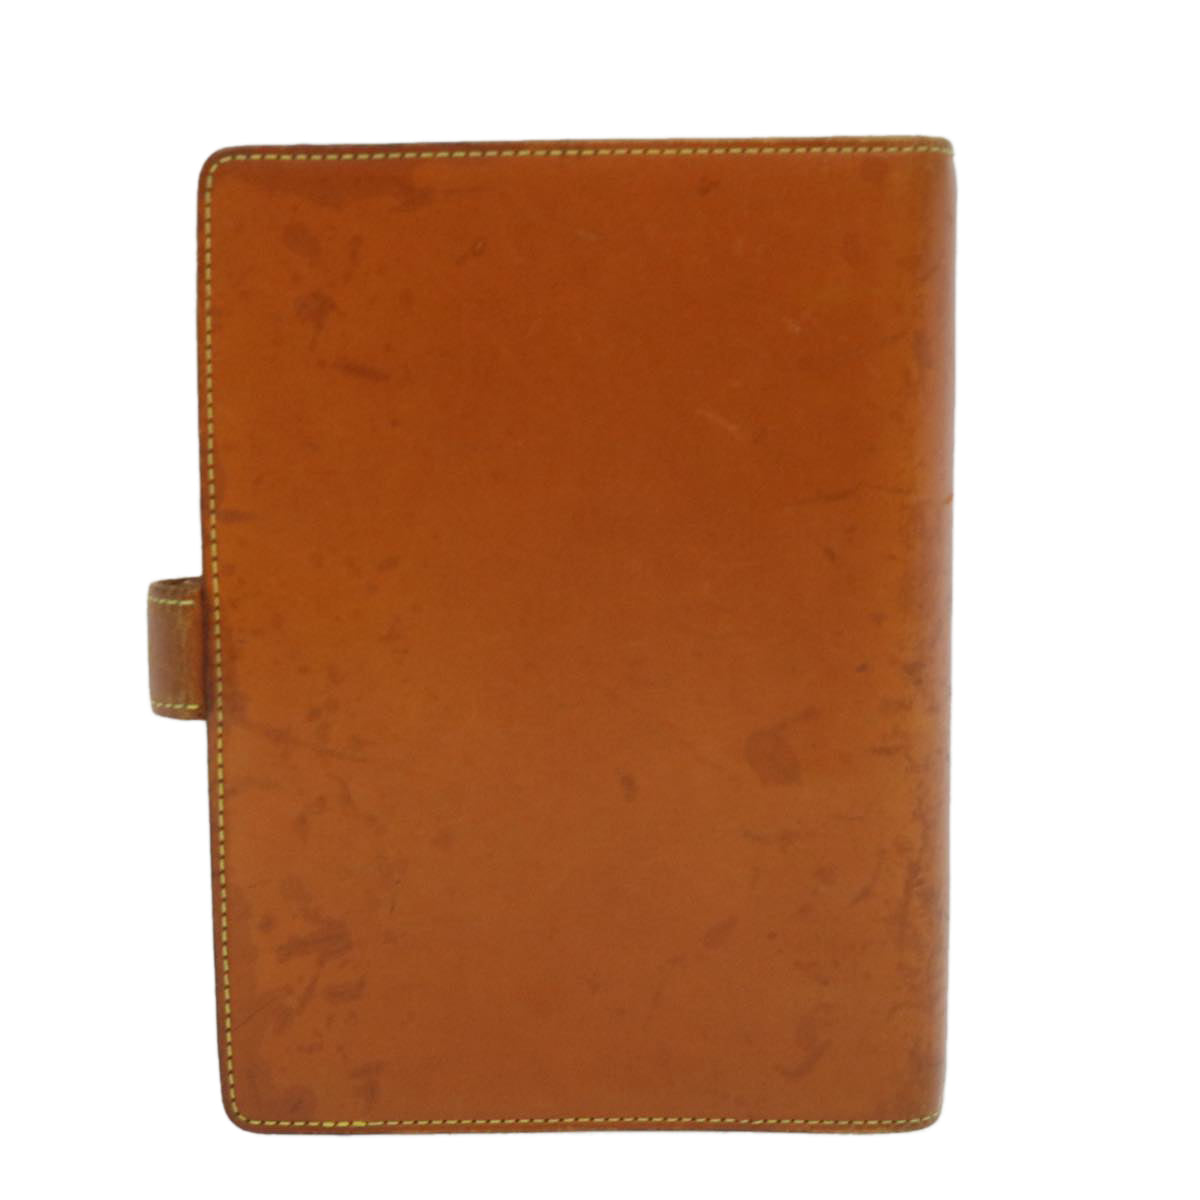 LOUIS VUITTON Nomad Agenda MM Day Planner Cover Brown R20105 LV Auth 32099 - 0